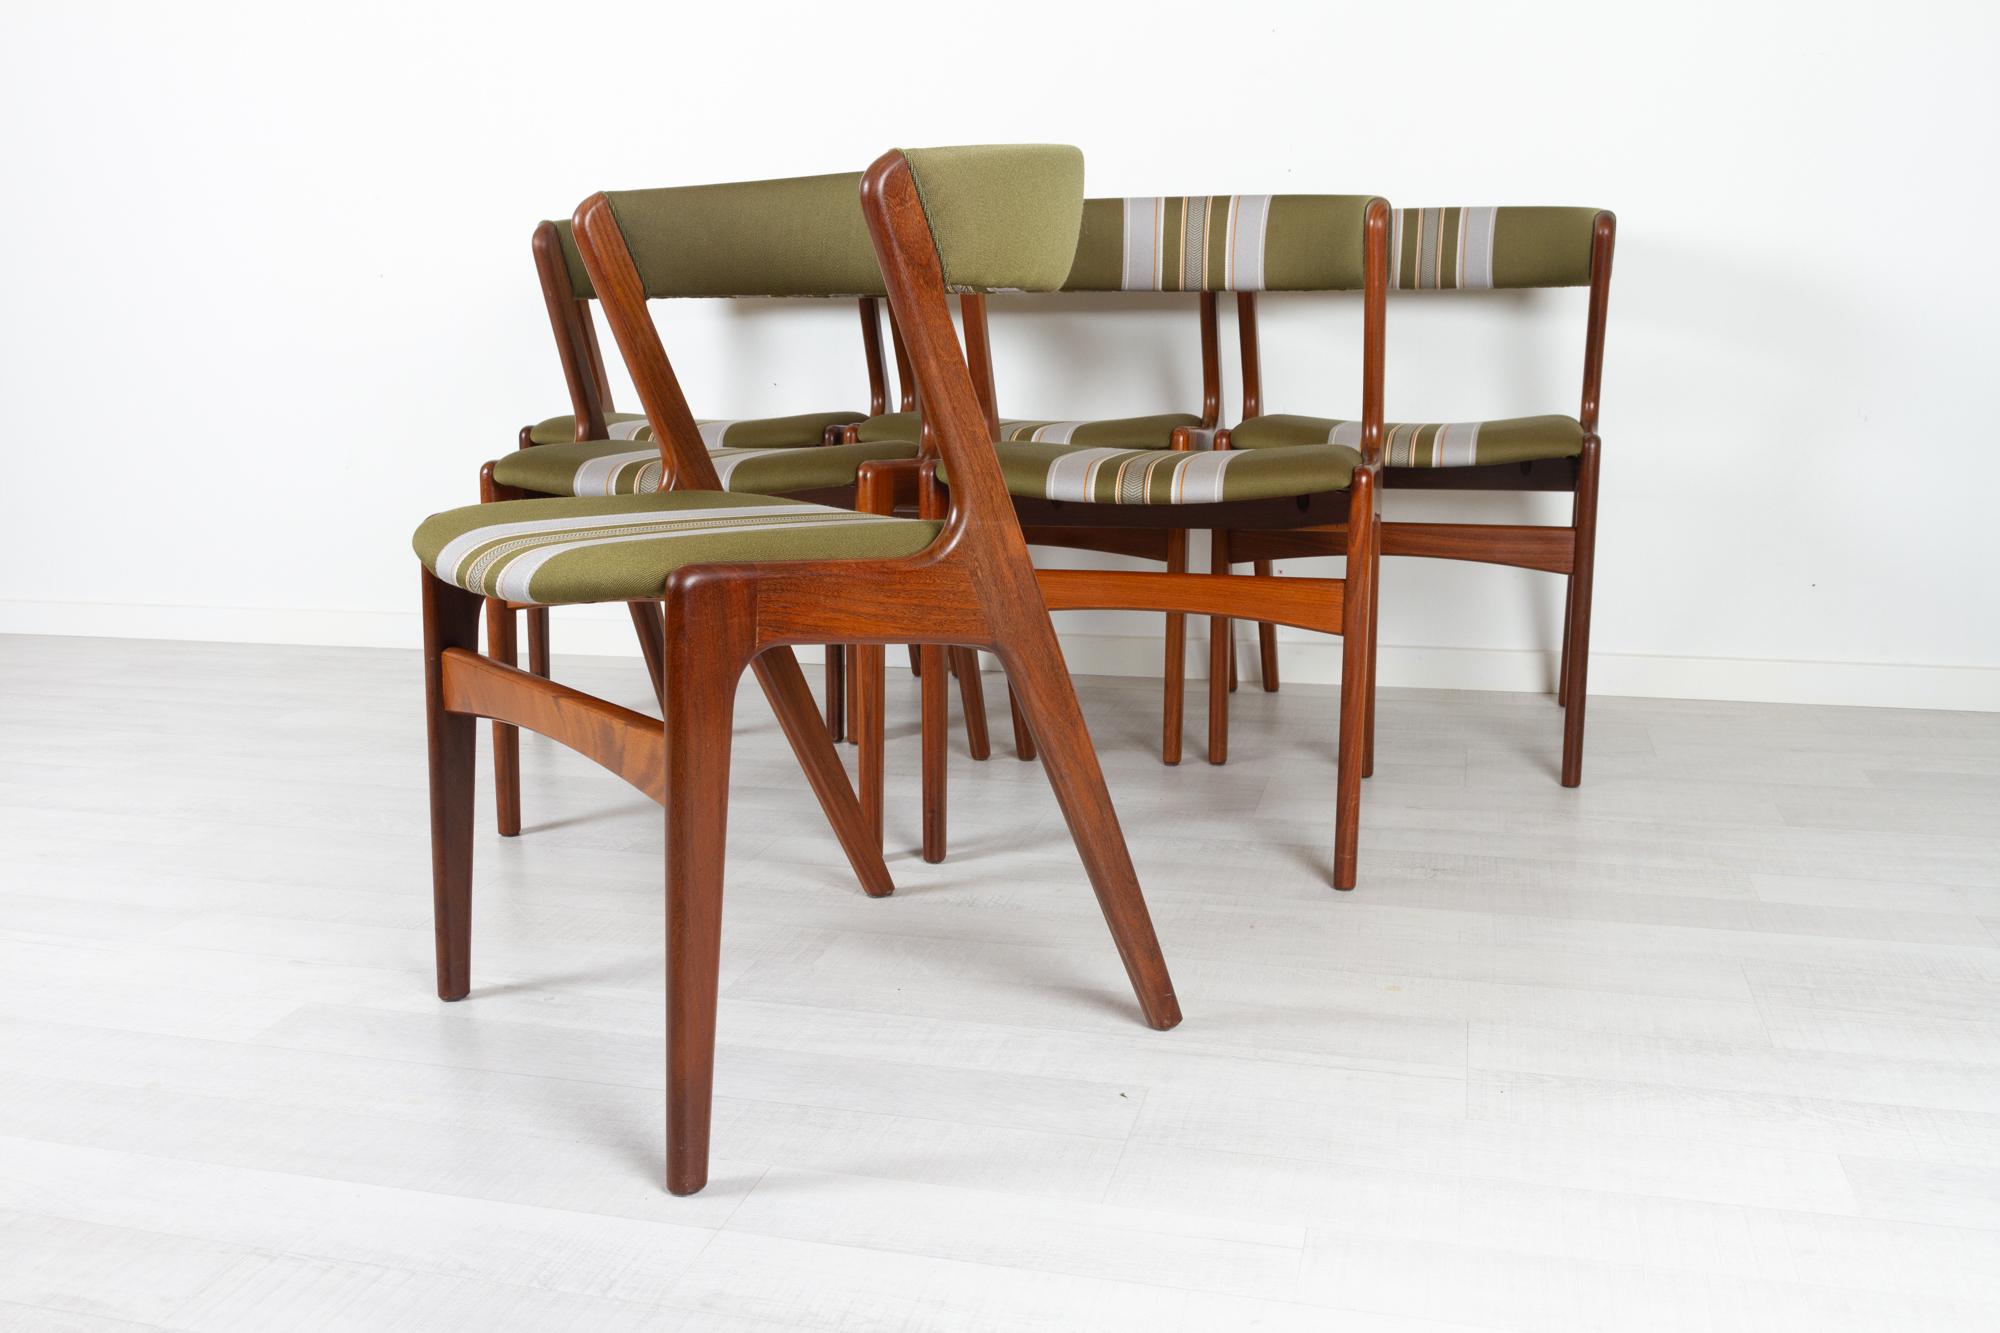 Vintage Danish teak dining chairs by Korup Stolefabrik, Denmark 1960s
Set of six Danish modern dining chairs in solid teak with original striped green upholstery. Beautiful organic design with wide curved backrest and dramatically slanted rear